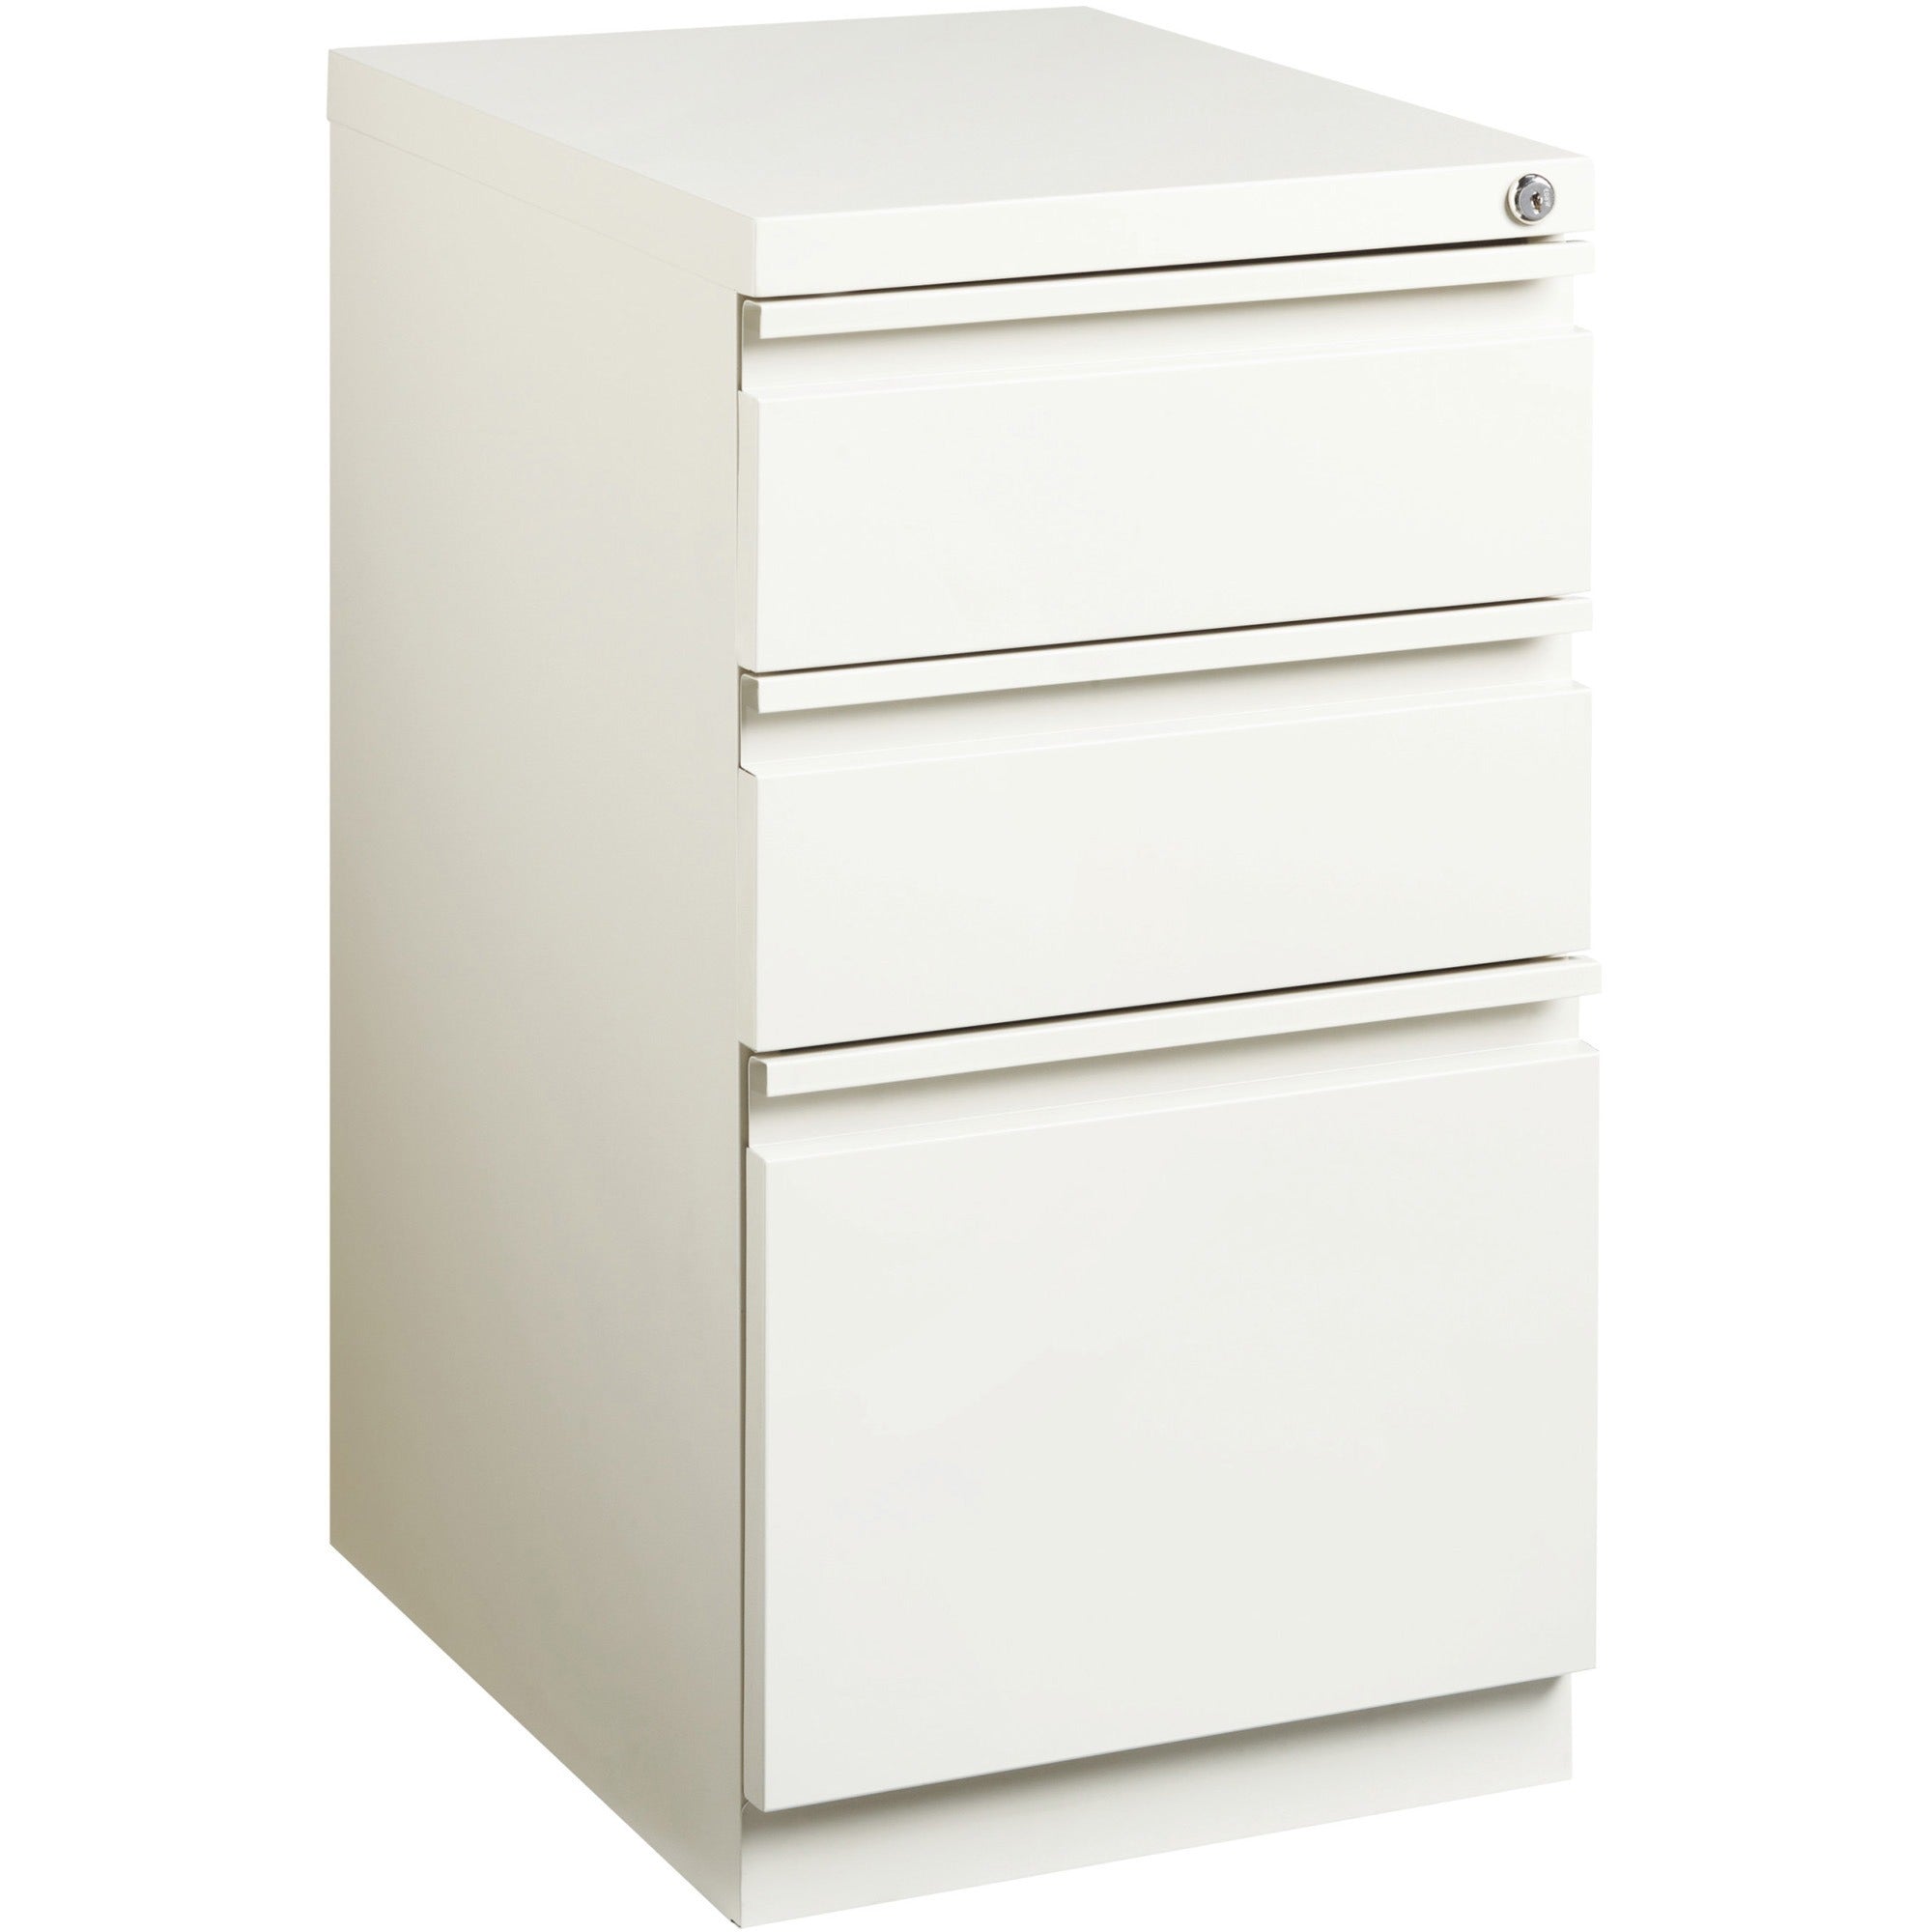 lorell-20-box-box-file-mobile-file-cabinet-with-full-width-pull-15-x-199-x-278-for-box-file-letter-vertical-mobility-ball-bearing-suspension-removable-lock-pull-out-drawer-recessed-drawer-casters-key-lock-white-powder-coated_llr00049 - 1